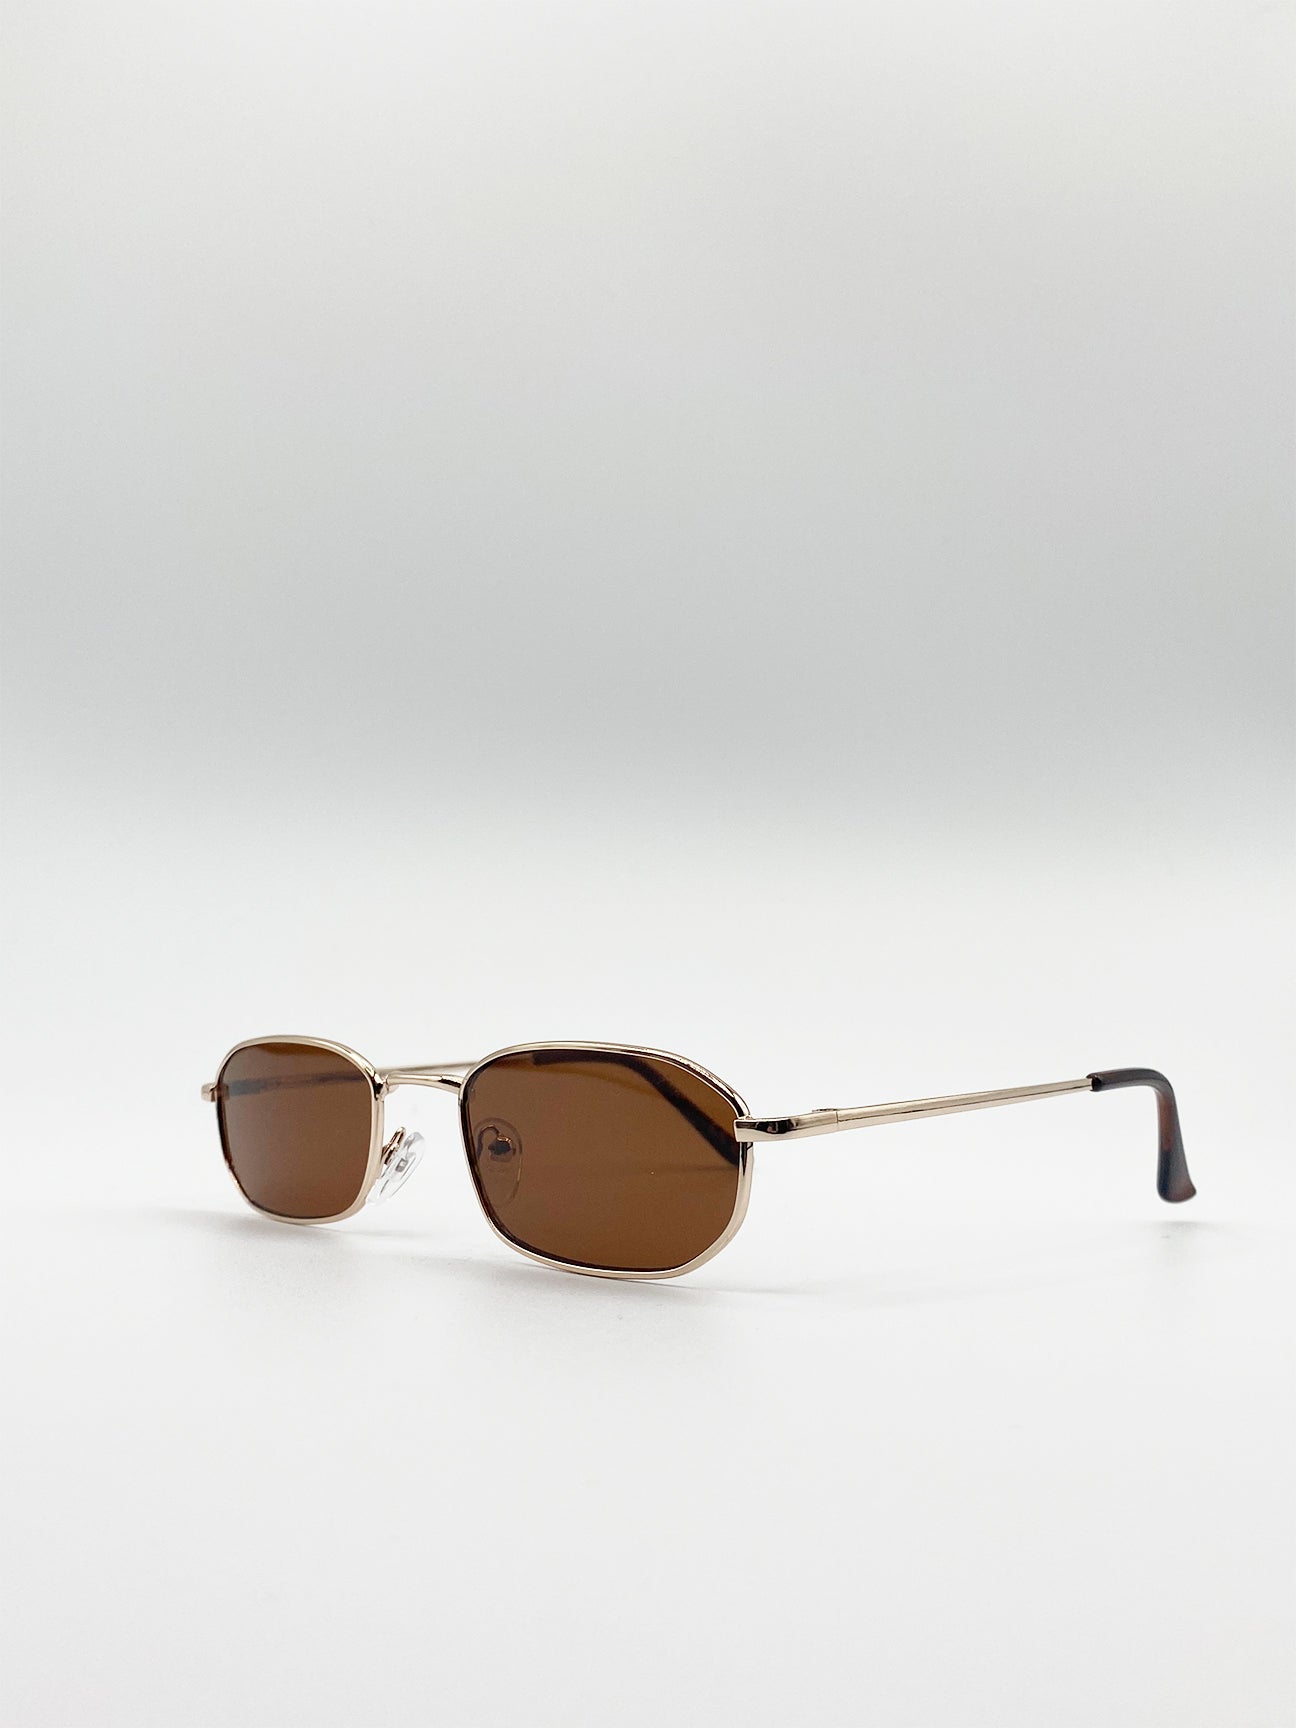 Gold Oval Sunglasses with Brown Lenses